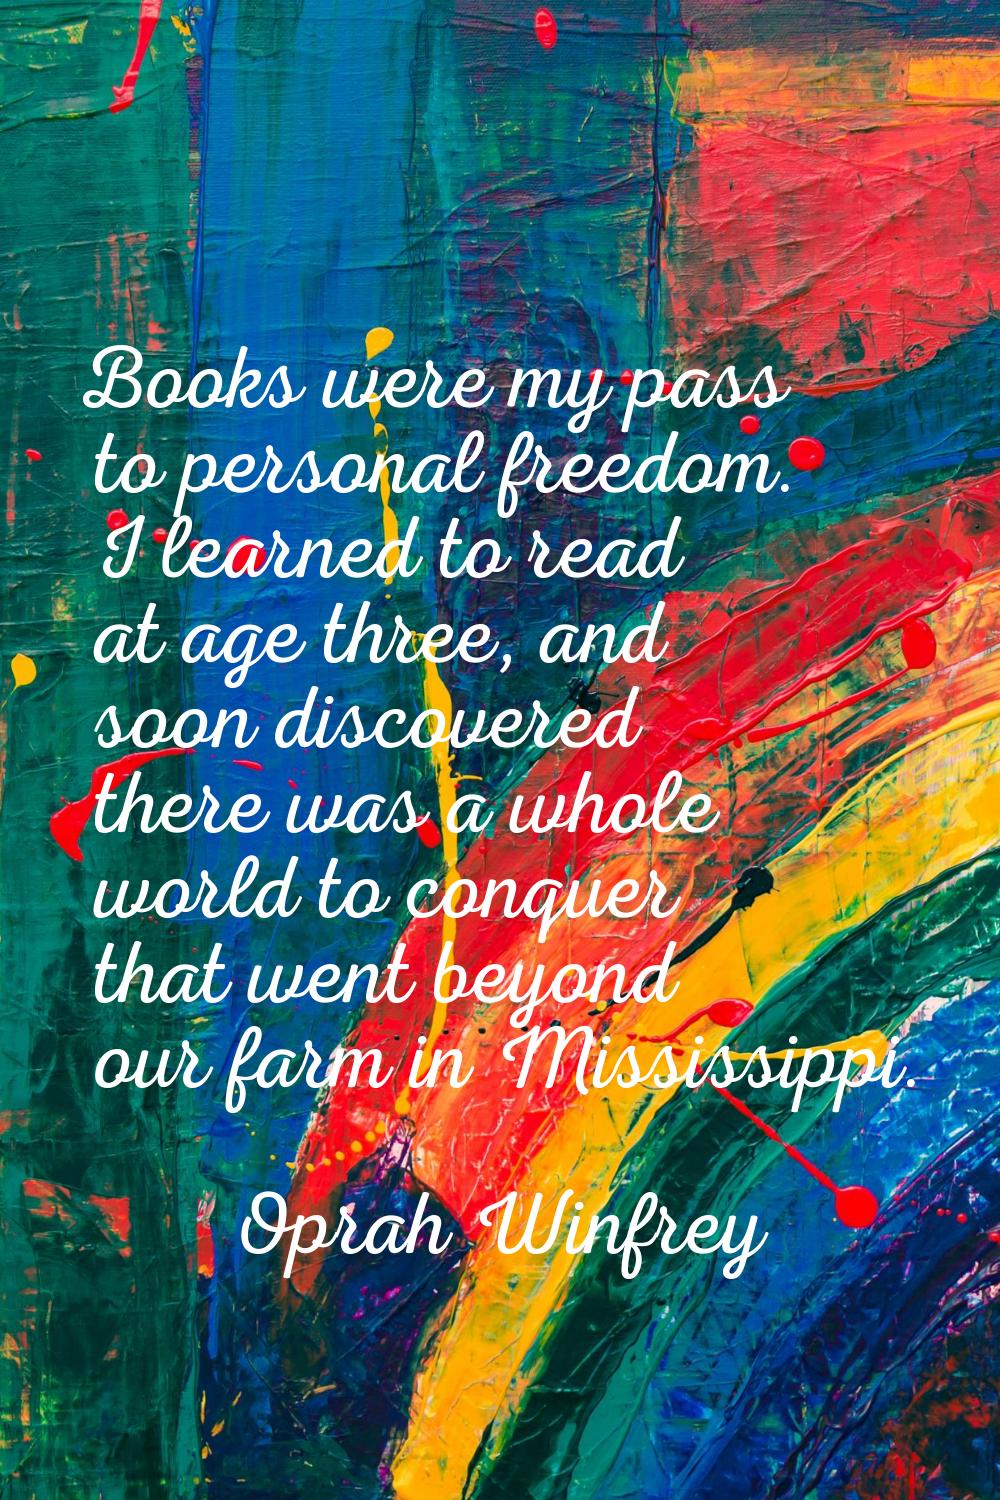 Books were my pass to personal freedom. I learned to read at age three, and soon discovered there w